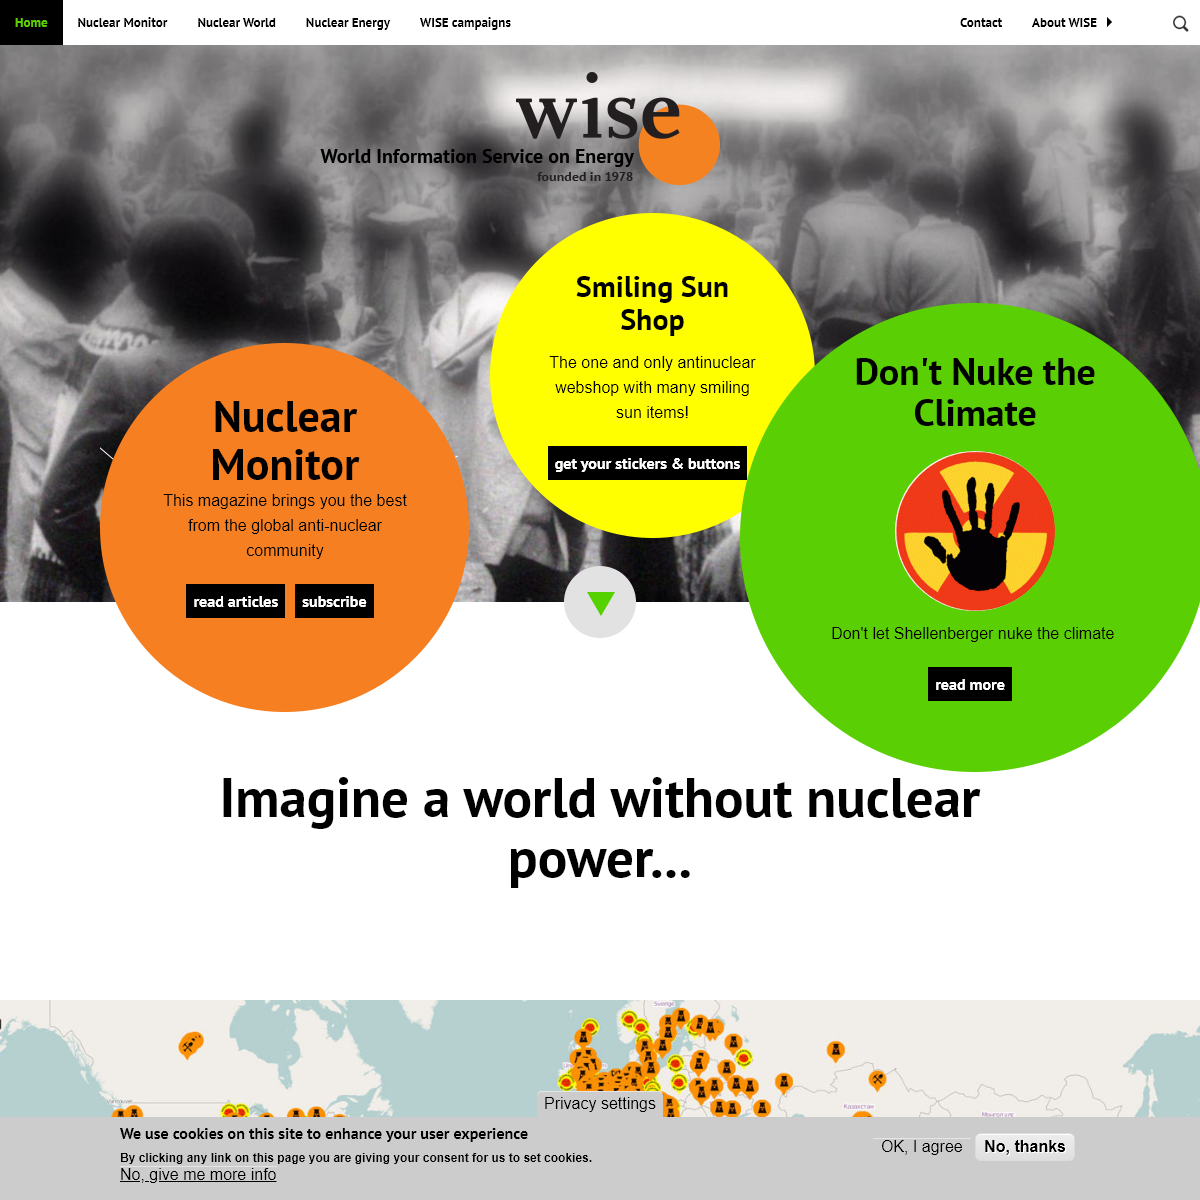 A complete backup of wiseinternational.org